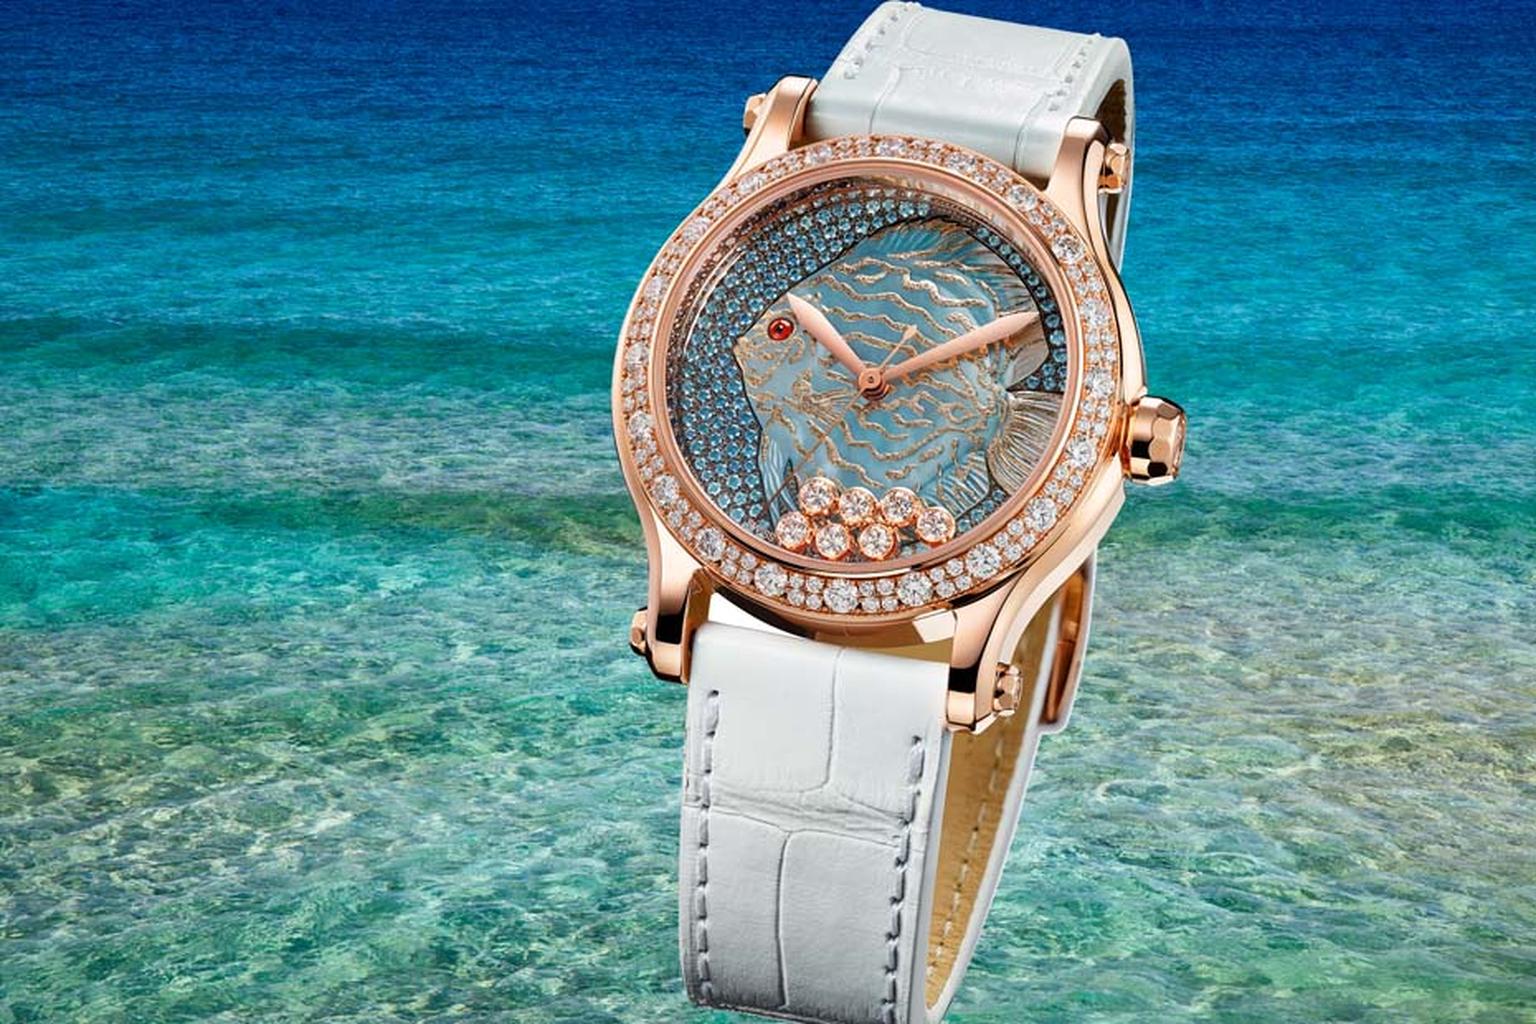 Fish-faced: new ladies' watches that swim in time to luxury | The ...